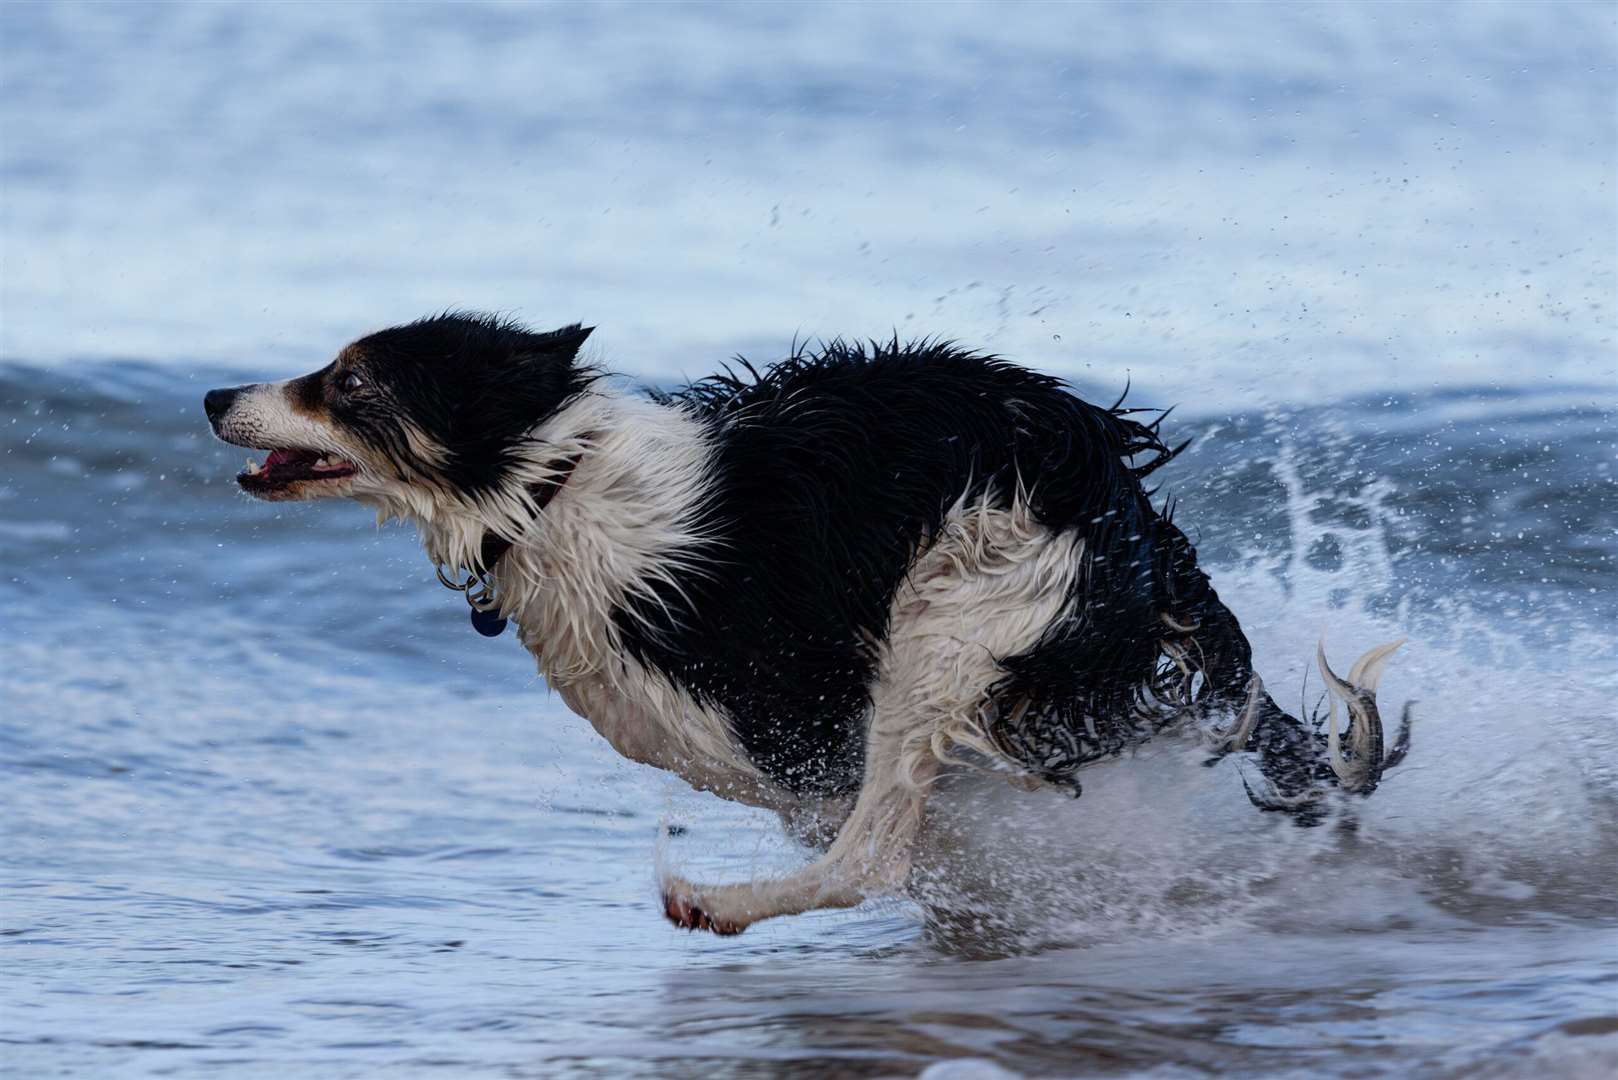 Forres man Thomas Salway's image of a dog at play on Findhorn Beach, which was highly commended in the Shipwrecked Mariners’ Society's 2020 photo contest.